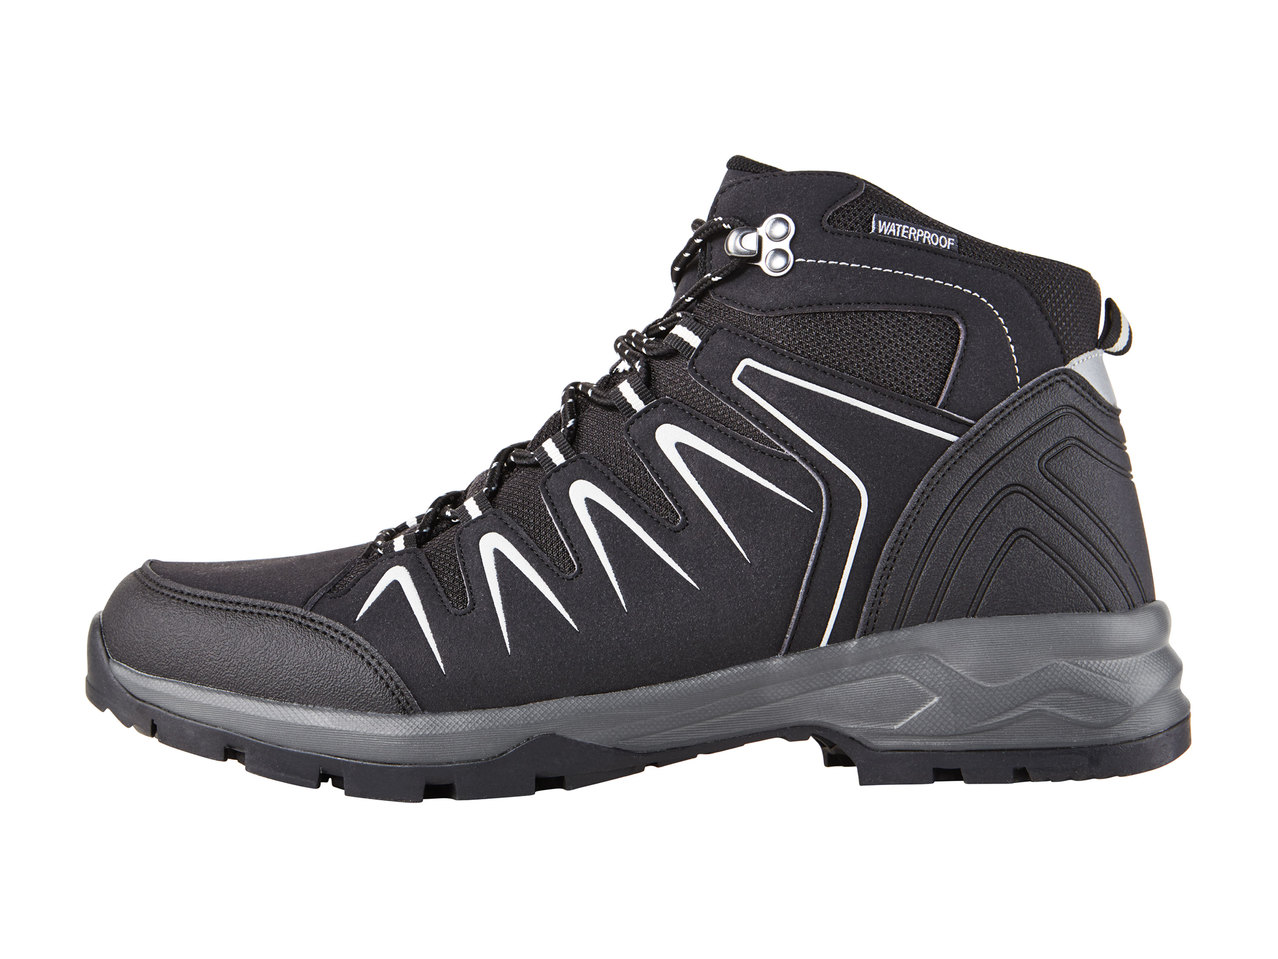 Crivit Hiking Shoes or Boots1